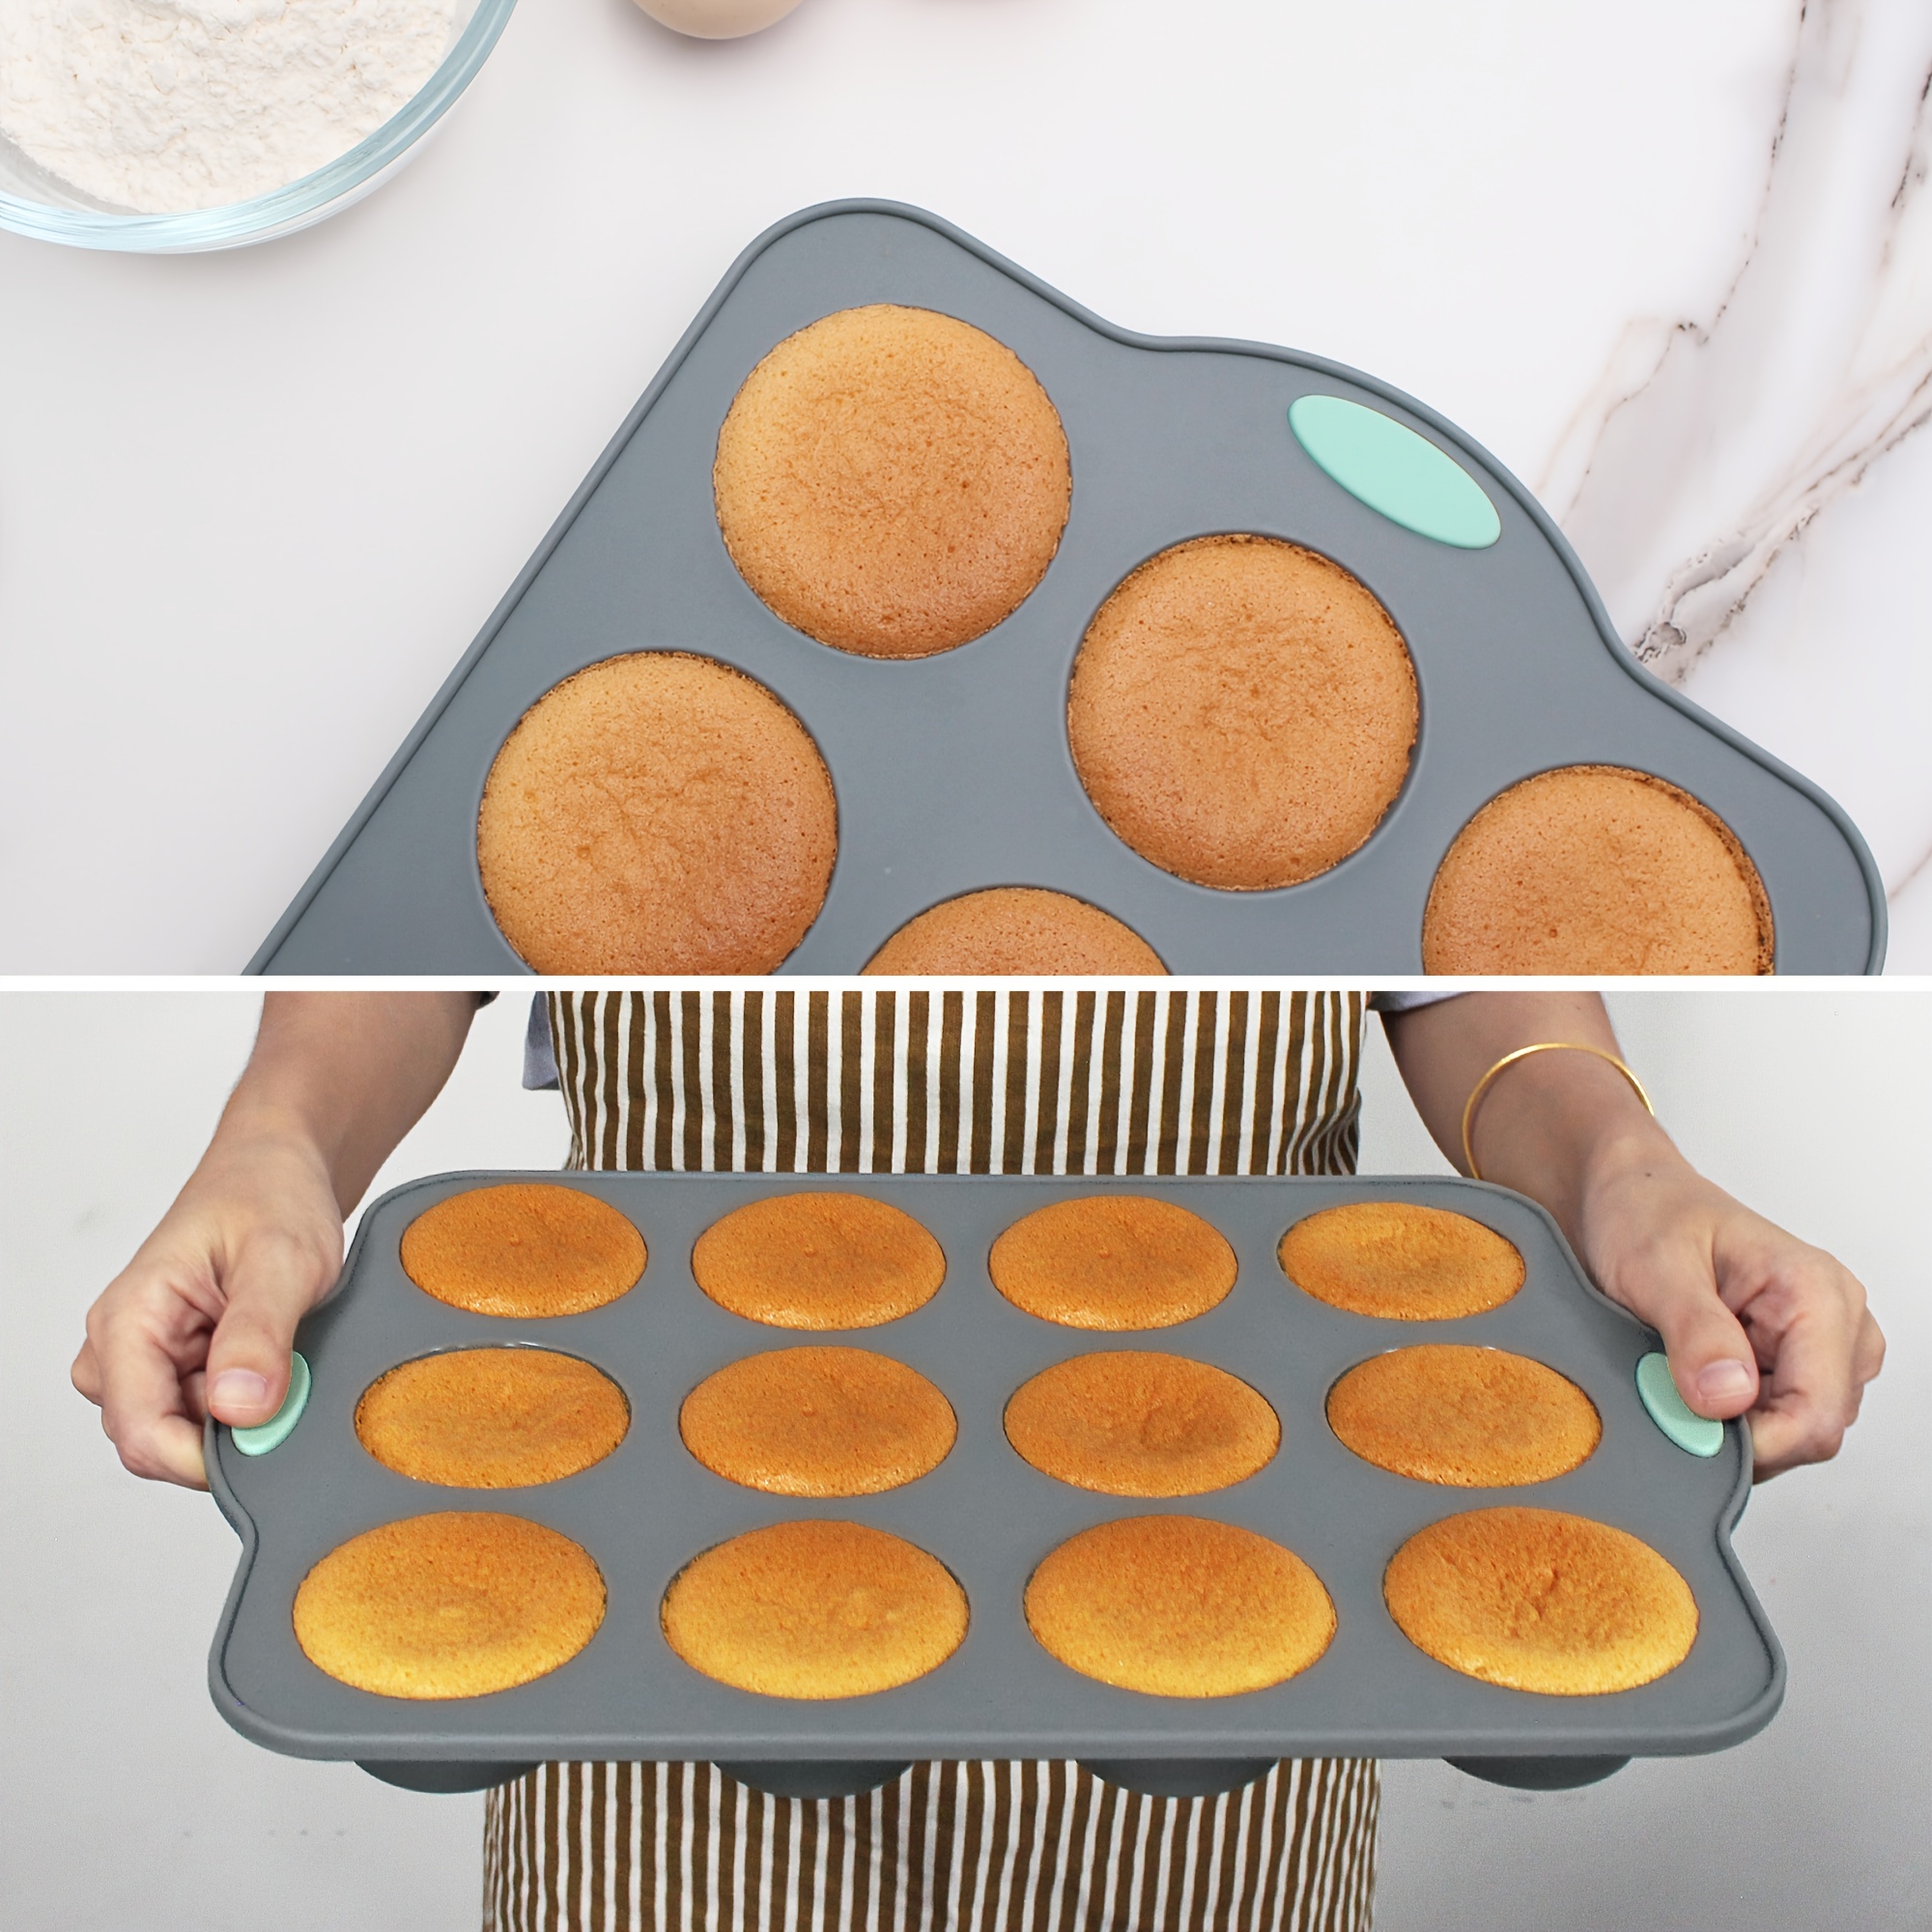 to Encounter Silicone Baking Pans Set, 4 Pieces Nonstick Bakeware Set with Baking Pans, Baking Sheets, Cookie Sheets, Cake Pan with Metal Reinforced